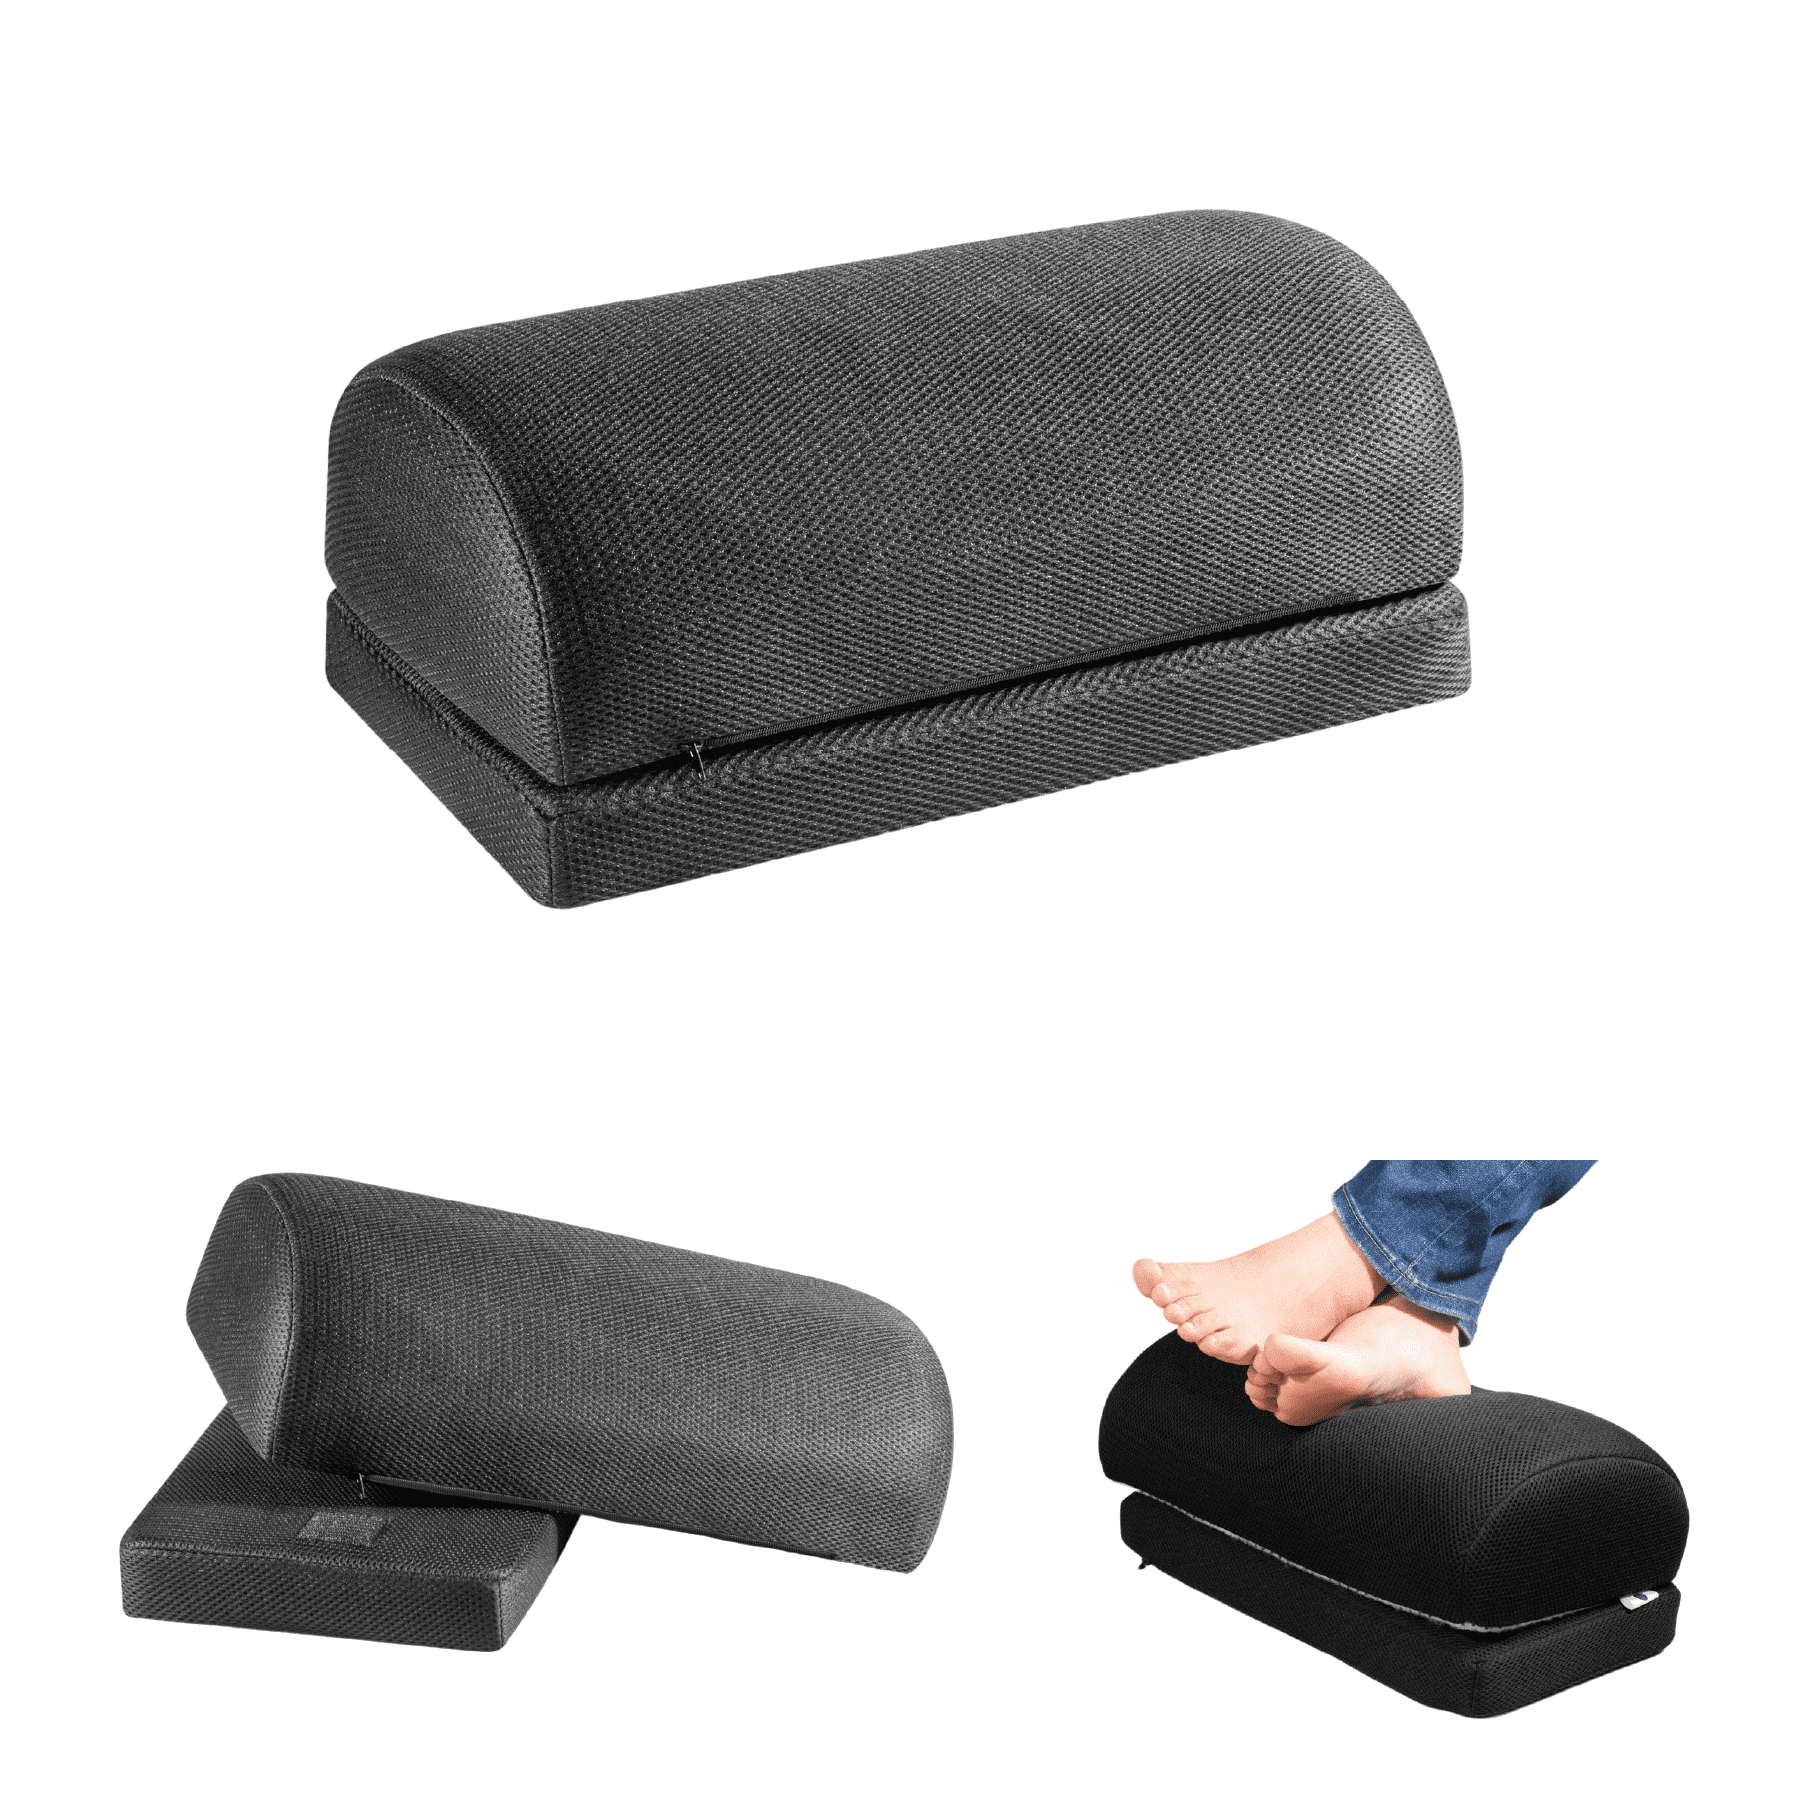 BeatriX - High Resilience (HR) Foam Foot Rest Cushion for Feet & leg Support - Firm Support The White Willow 